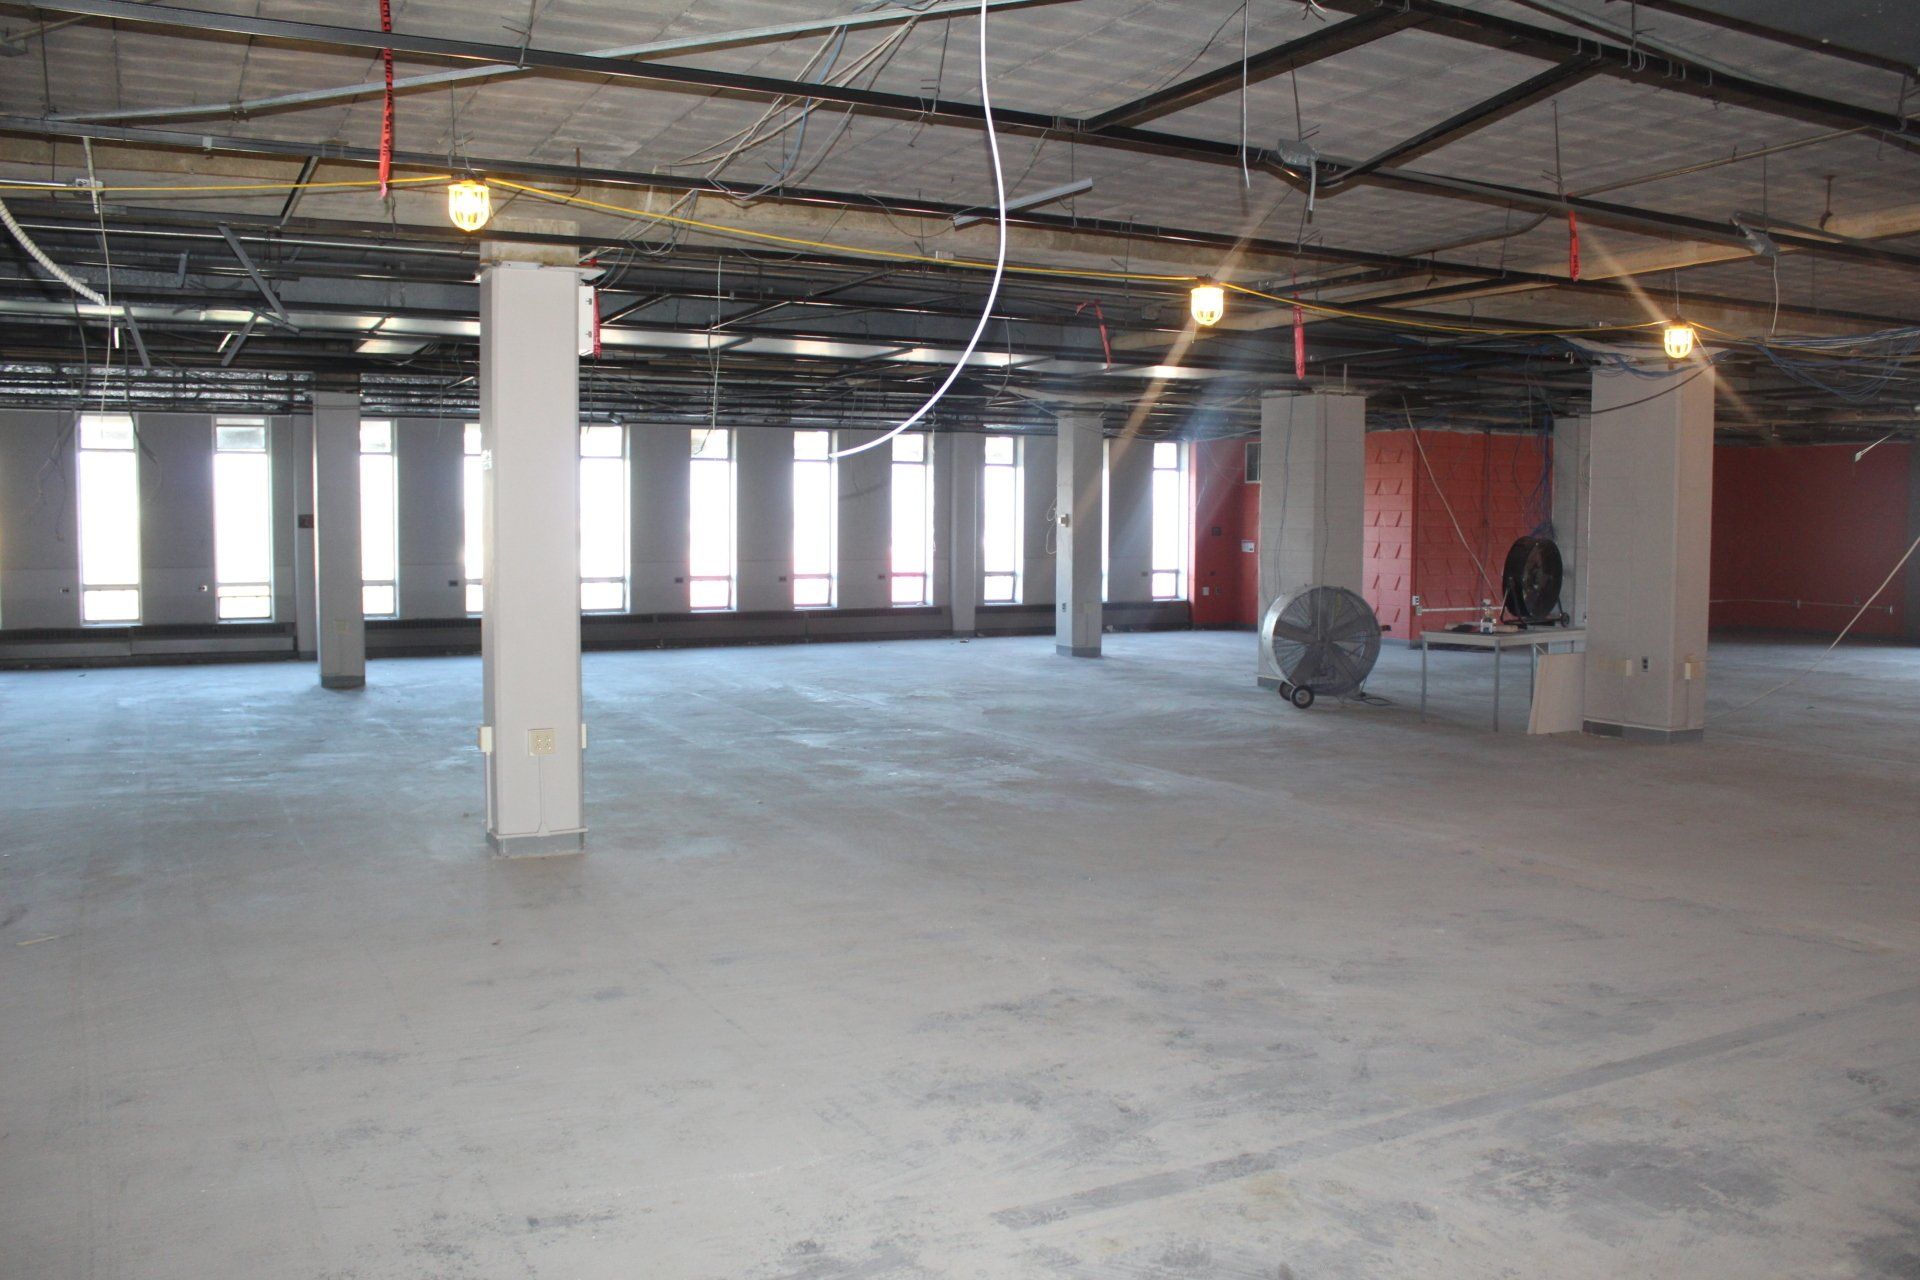 A large empty room with columns and a fan.